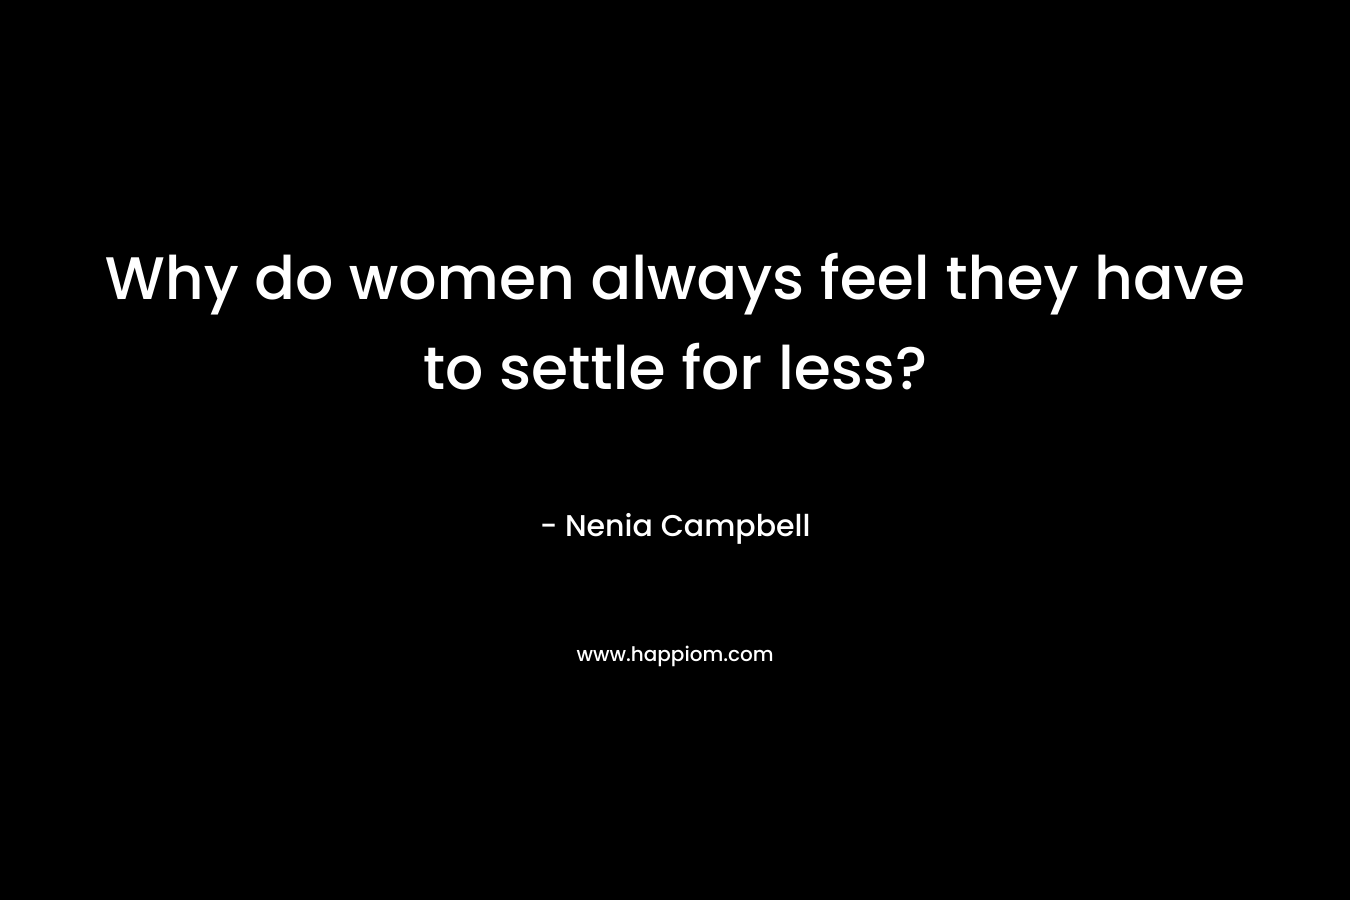 Why do women always feel they have to settle for less?